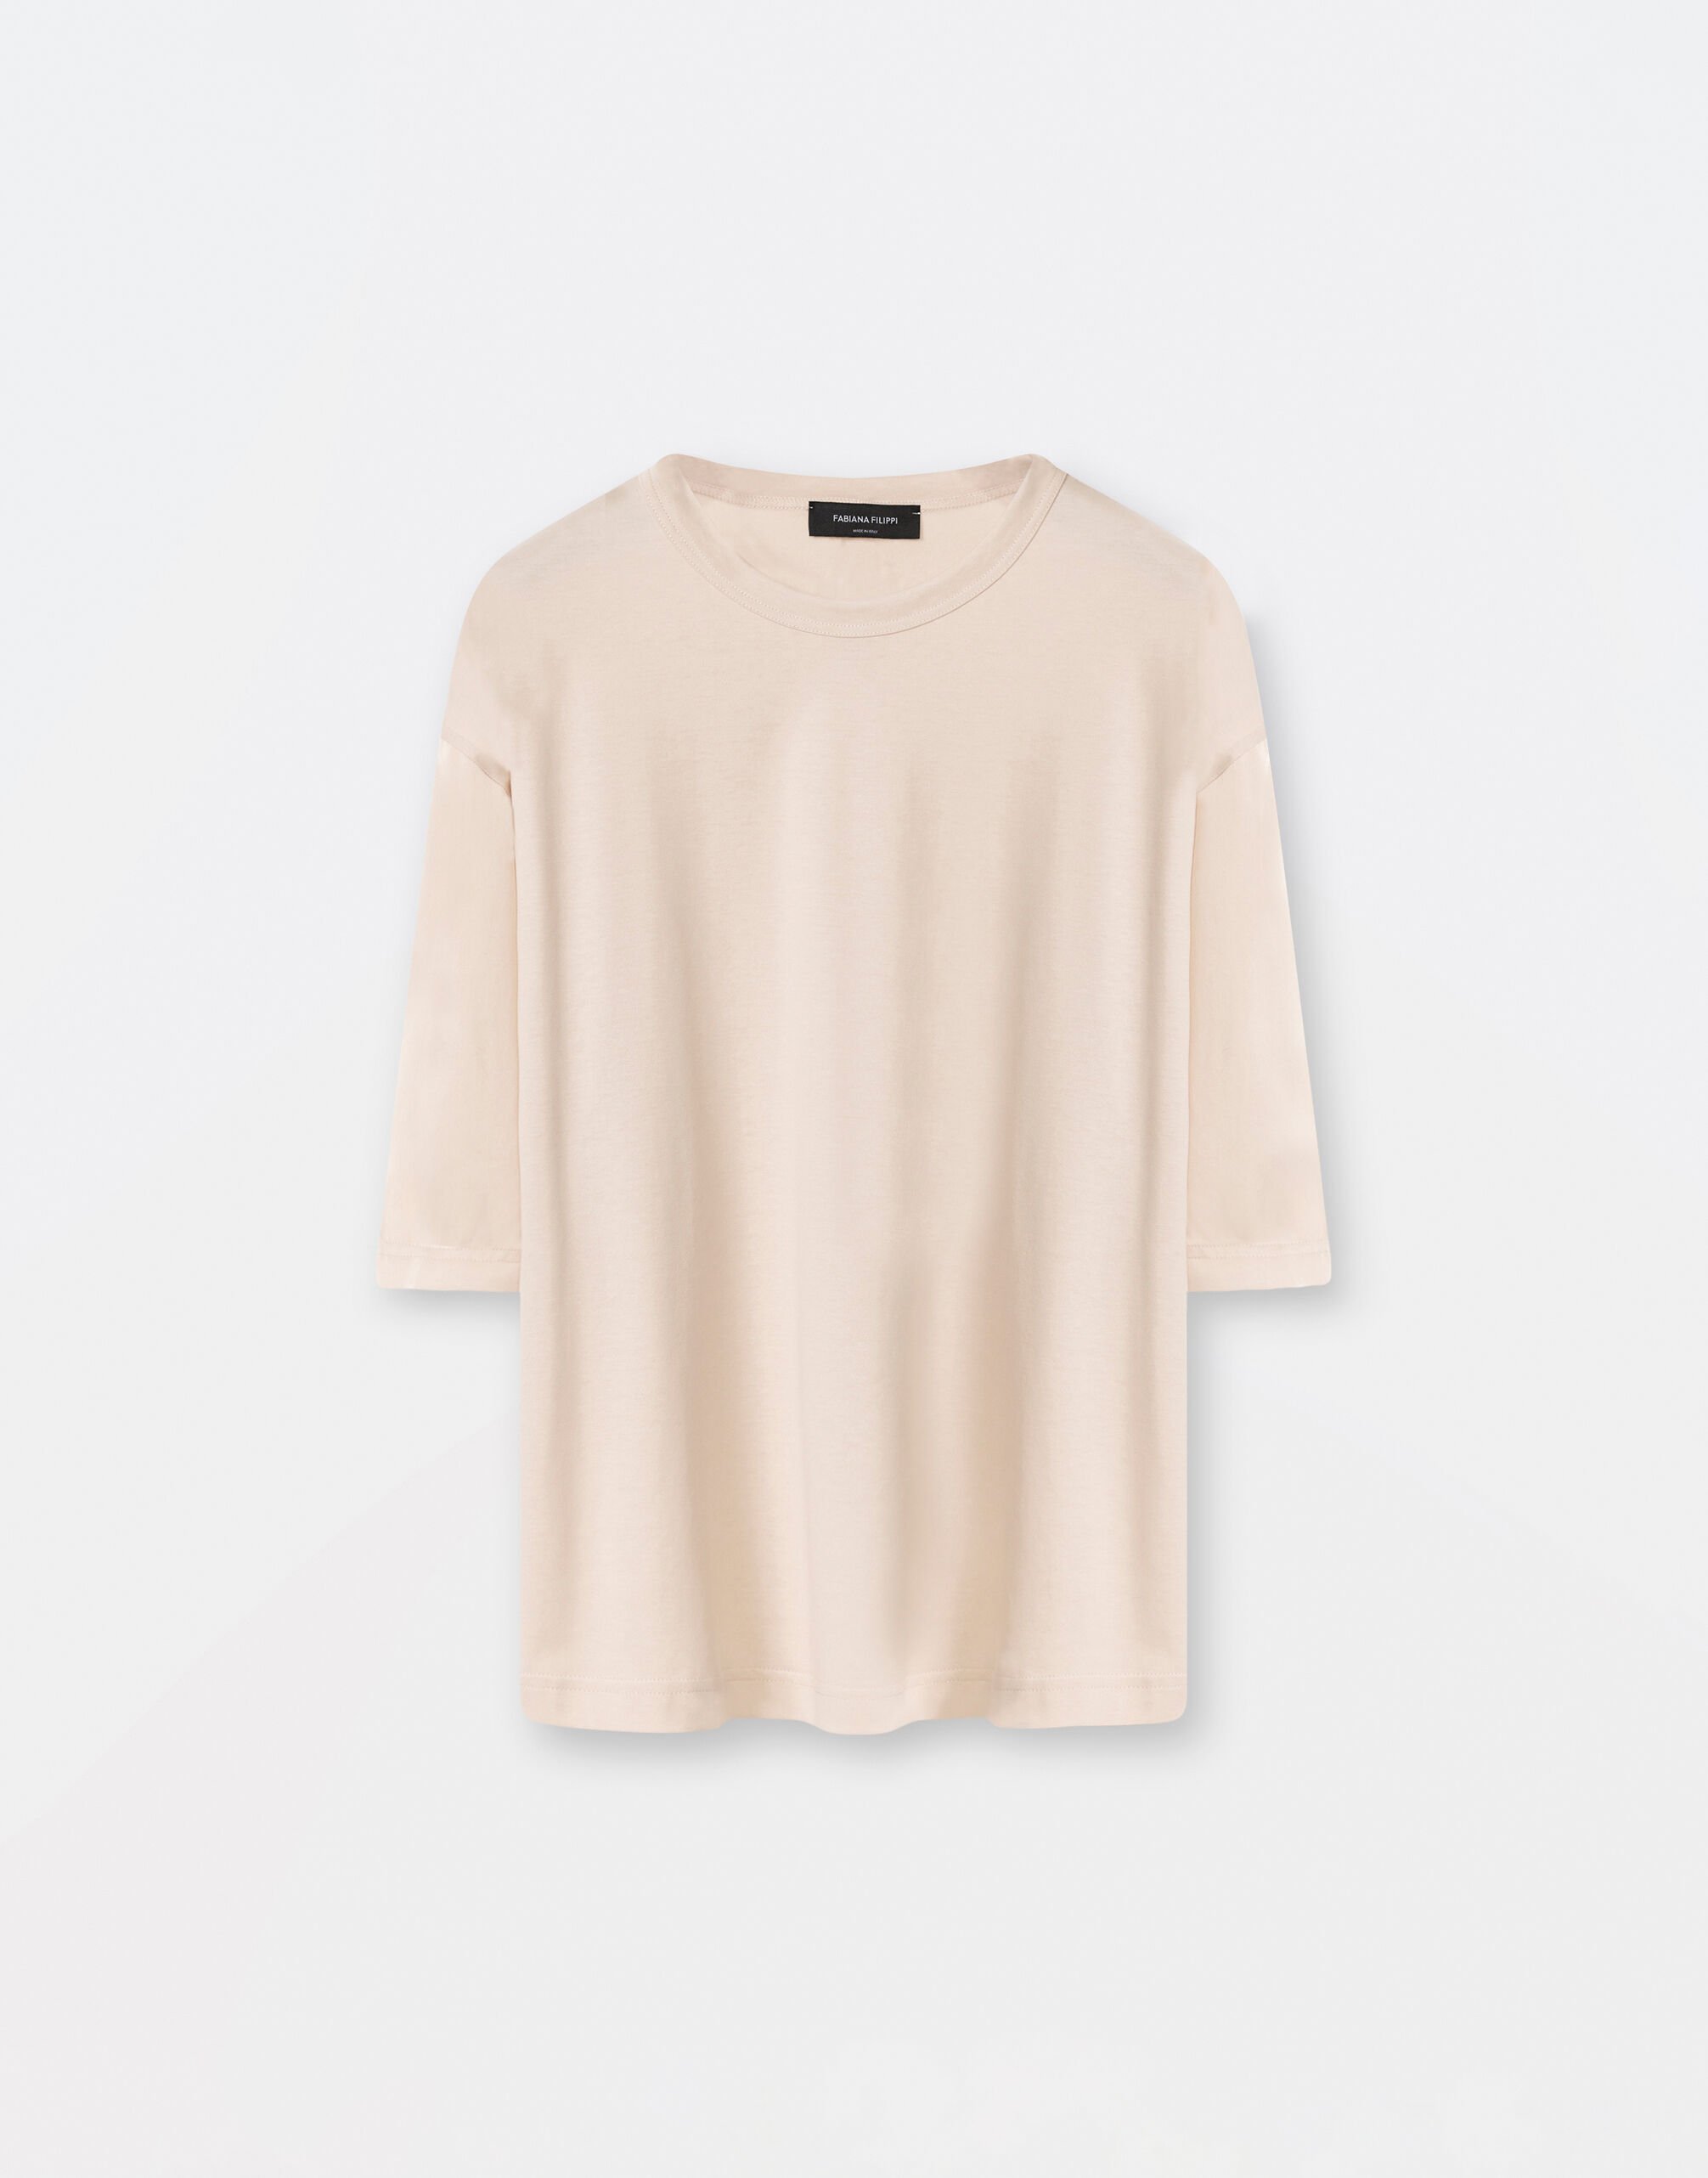 ${brand} Jersey top, dusty pink ${colorDescription} ${masterID}